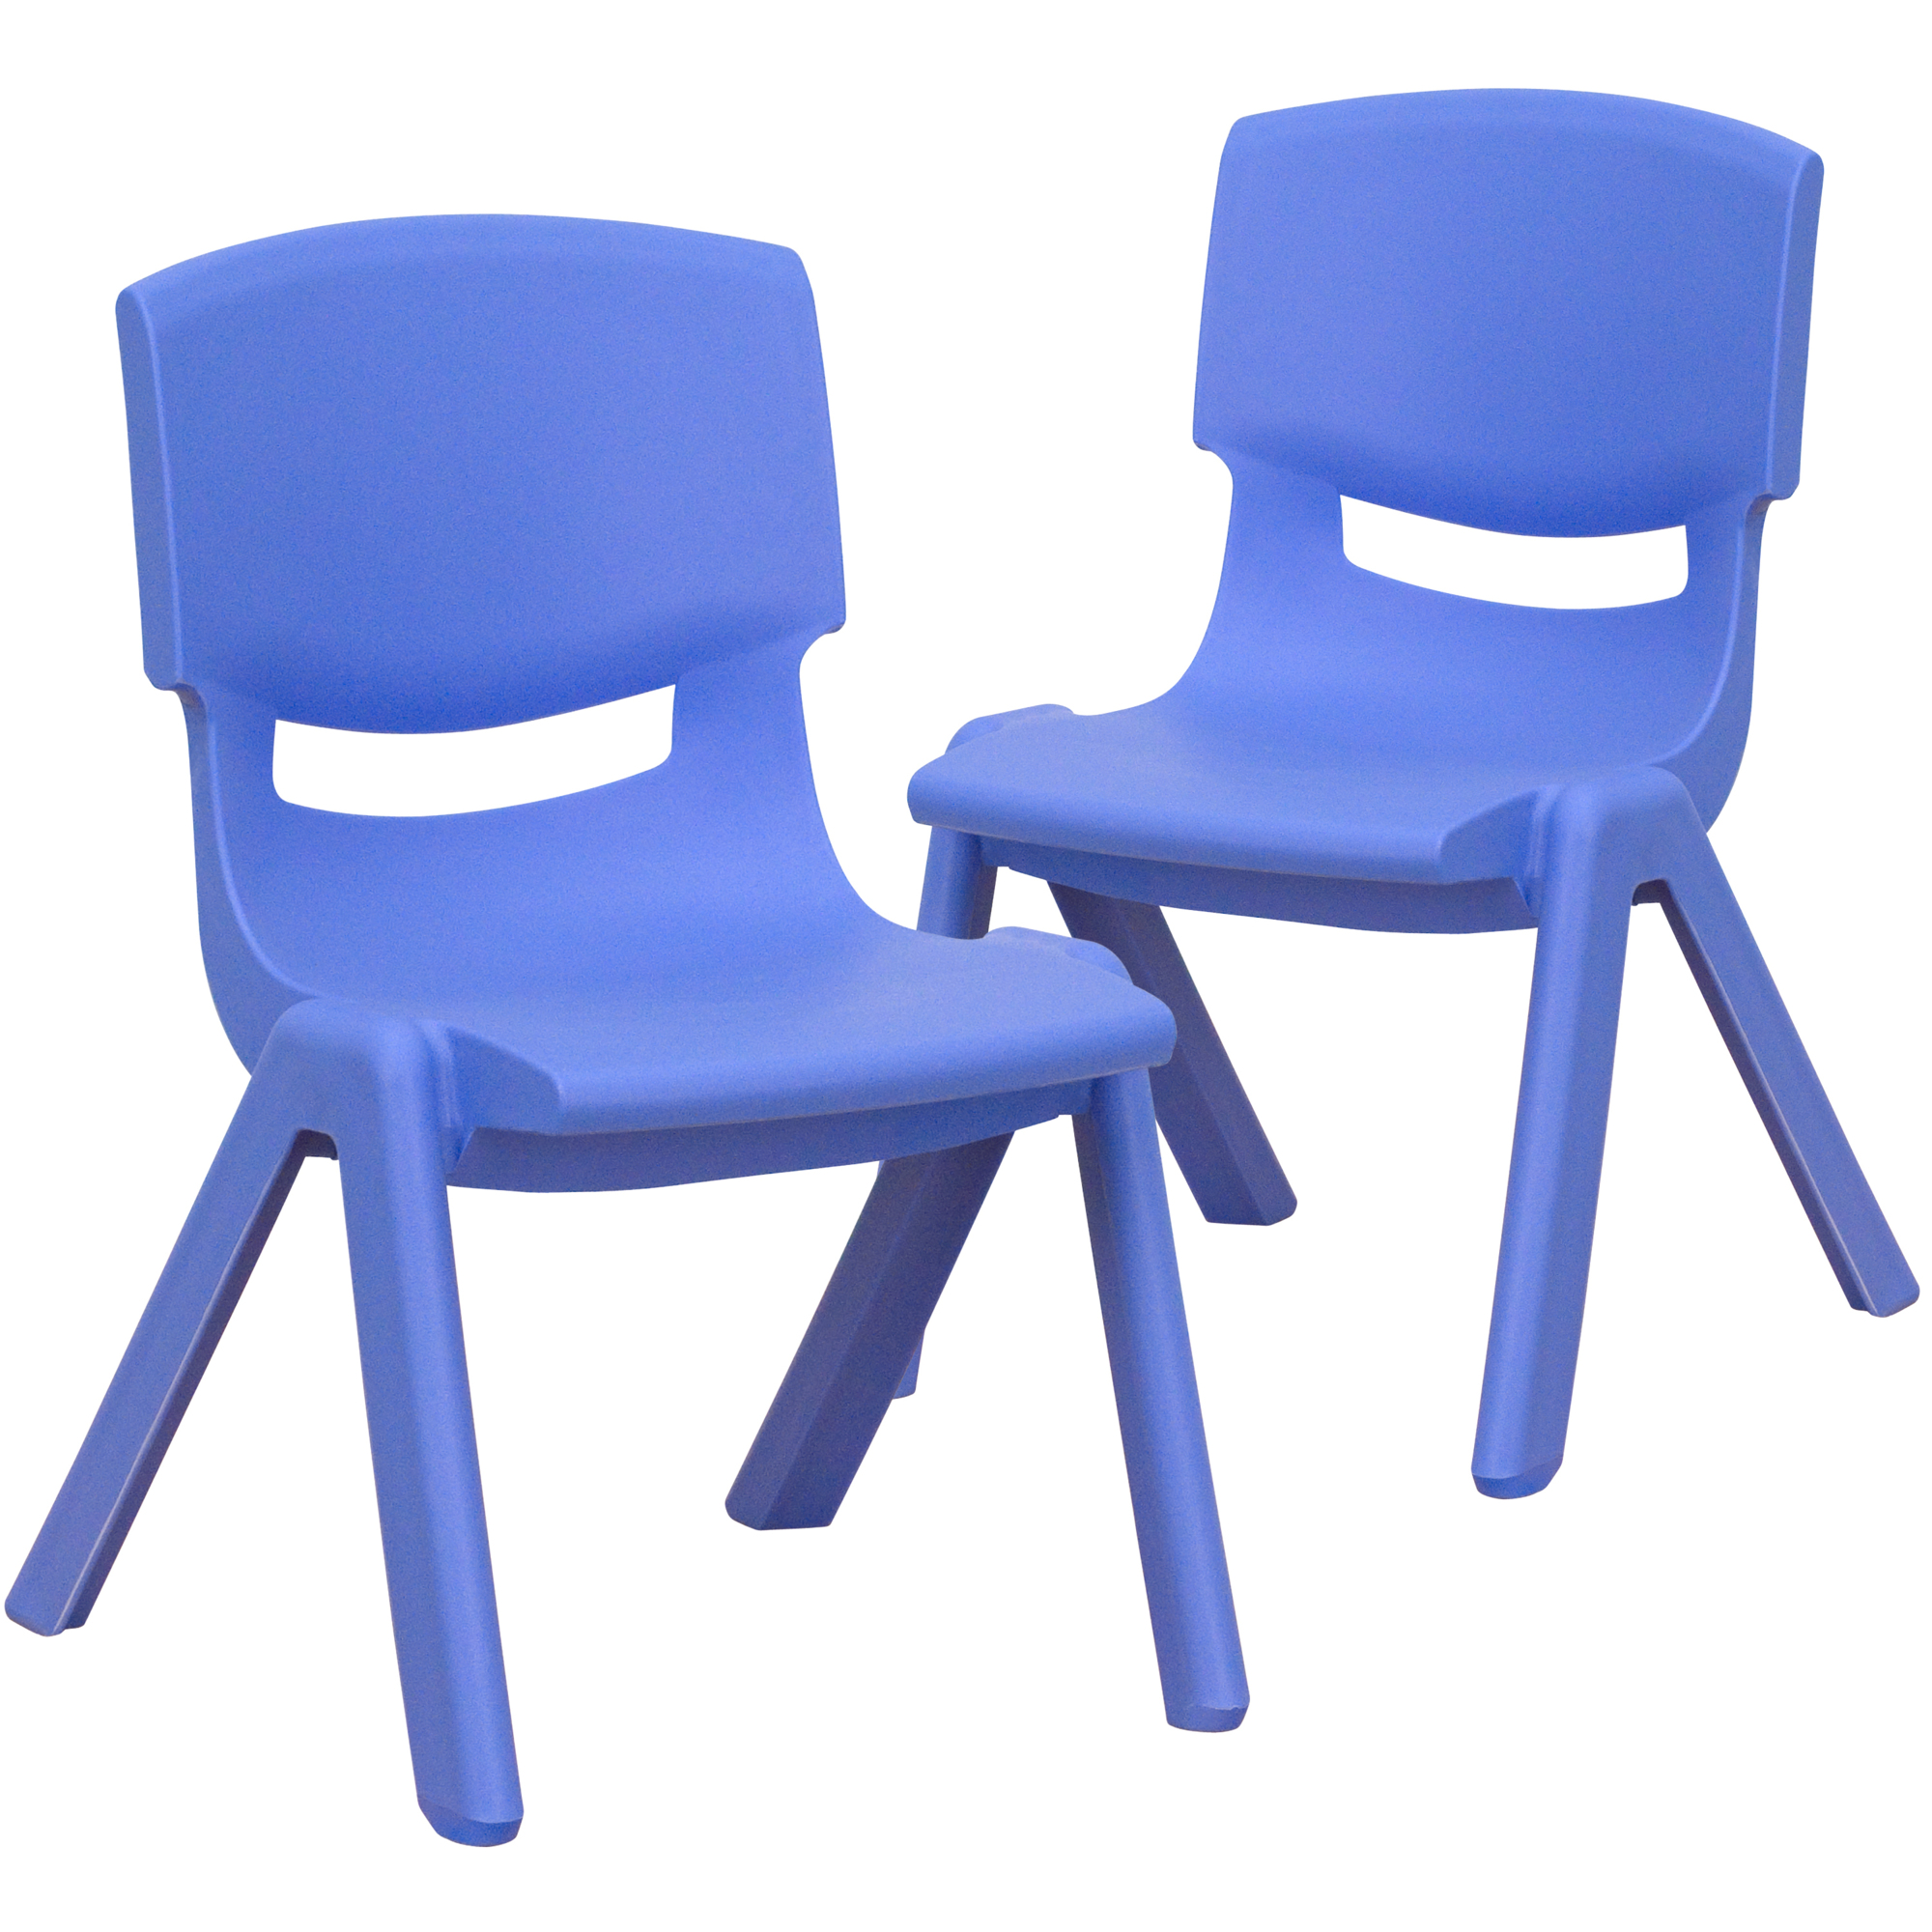 Flash Furniture, 2 Pack Blue Plastic School Chair-10.5Inch H Seat, Primary Color Blue, Included (qty.) 2, Model 2YUYCX003BLUE